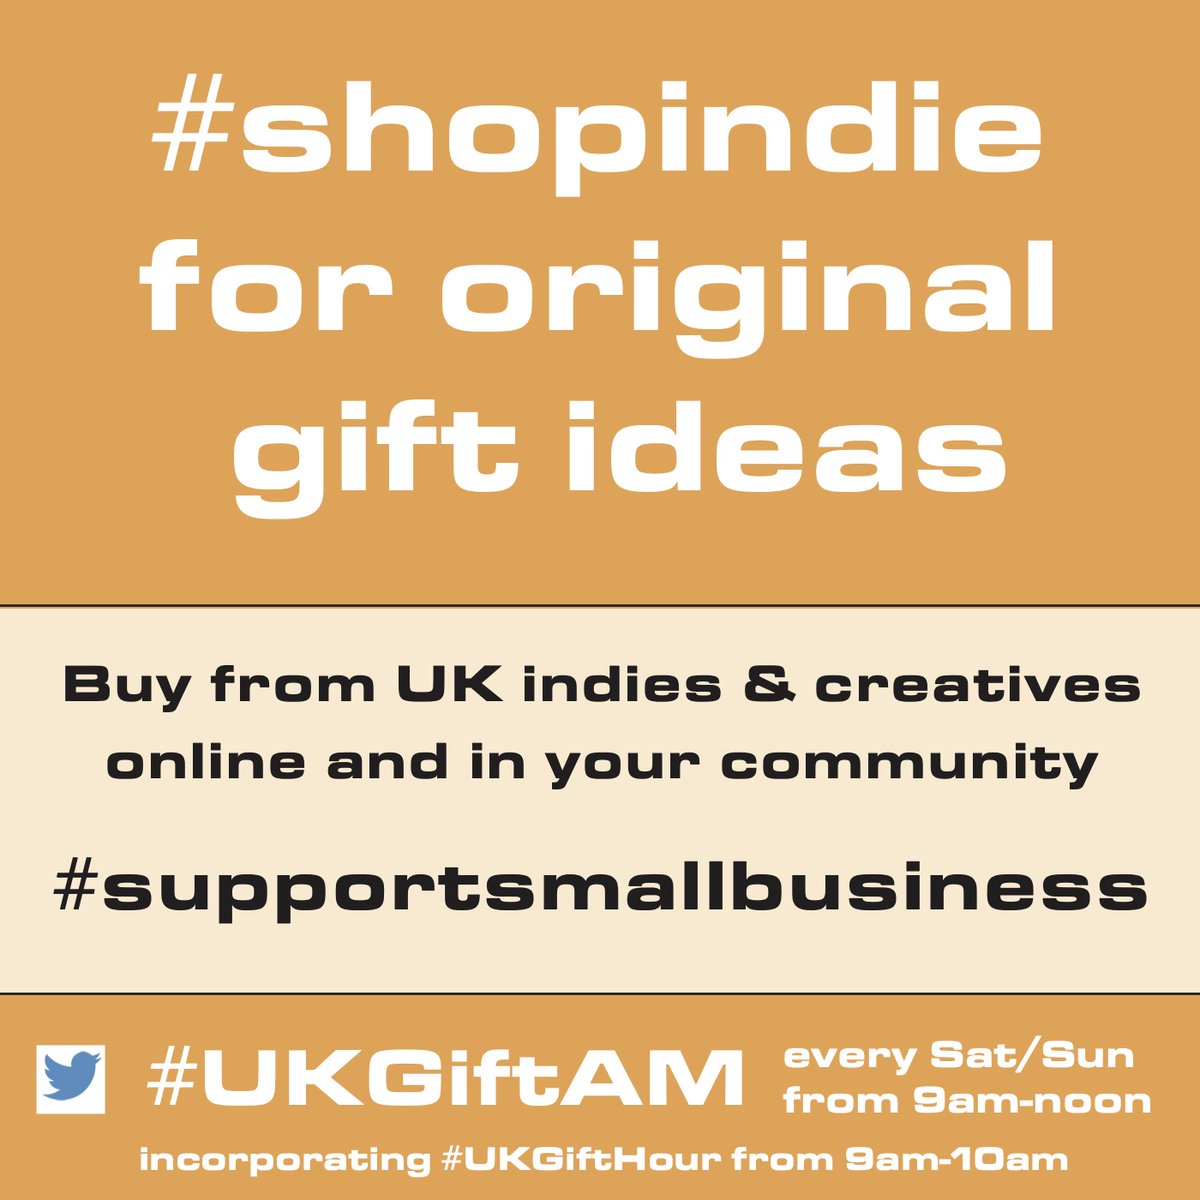 It's #SaturdayMorning, it's 9am, time to get in on the #shopindie trend! #UKGiftHour #UKGIftAM is open highlighting #giftideas with a difference from UK indies & creatives. Share, share, share to spread the #supportsmallbusiness message for all 🤗🎁 #planahead #giftfinder